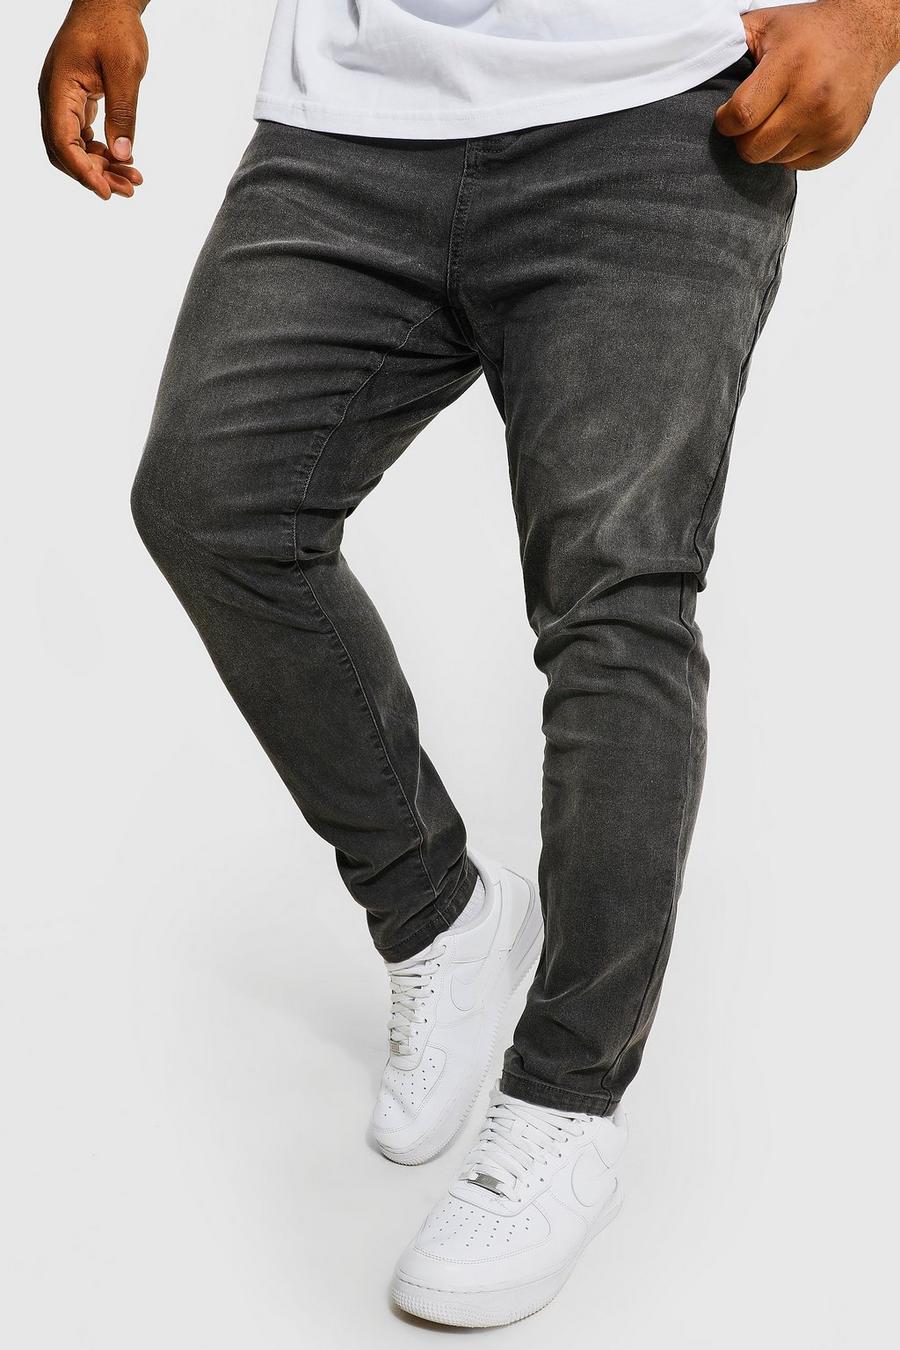 Charcoal gris Plus Super Skinny Jean With Poly